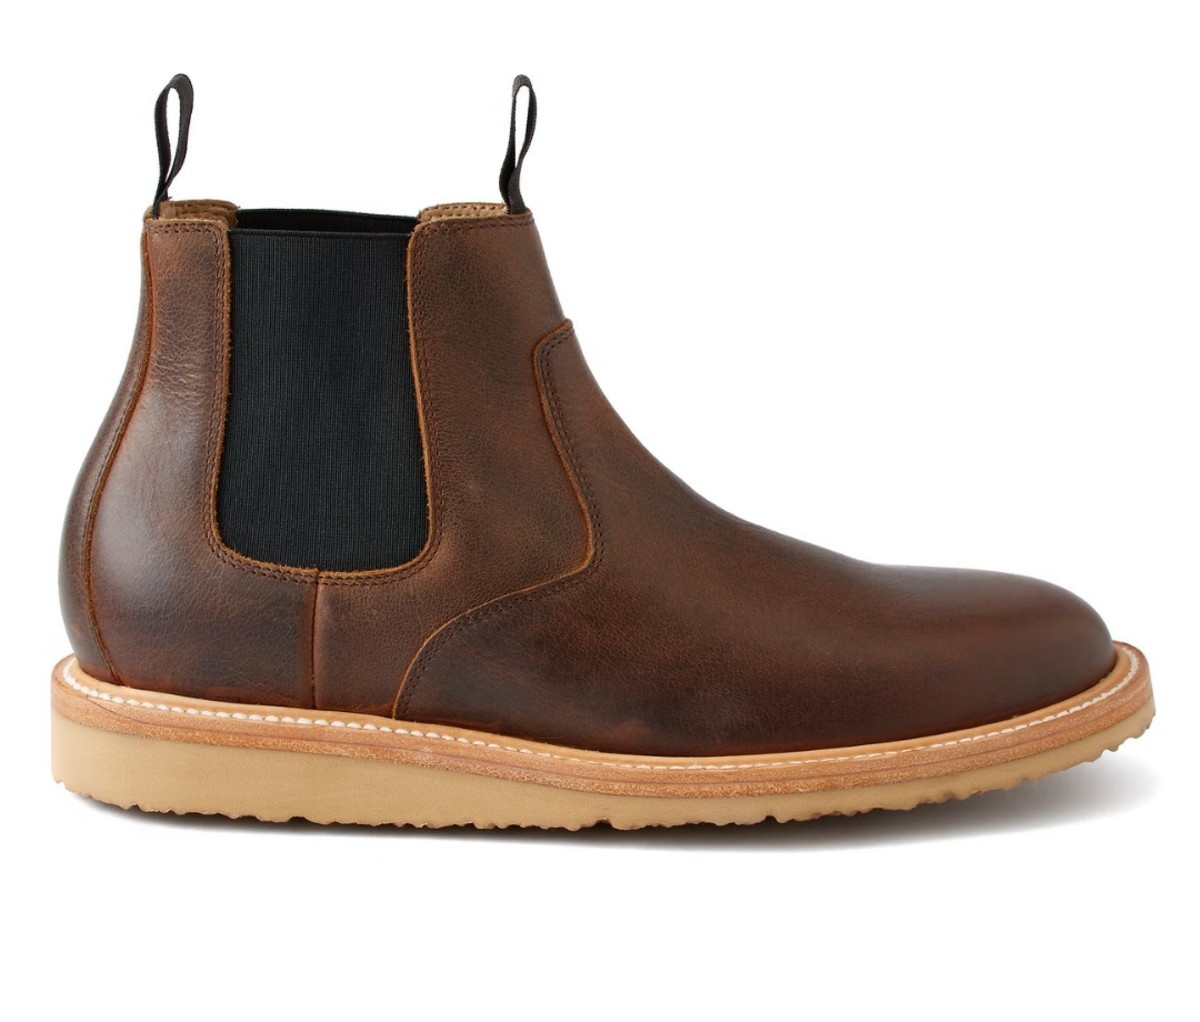 Best Chelsea boots for men 2022 to suit your style and budget